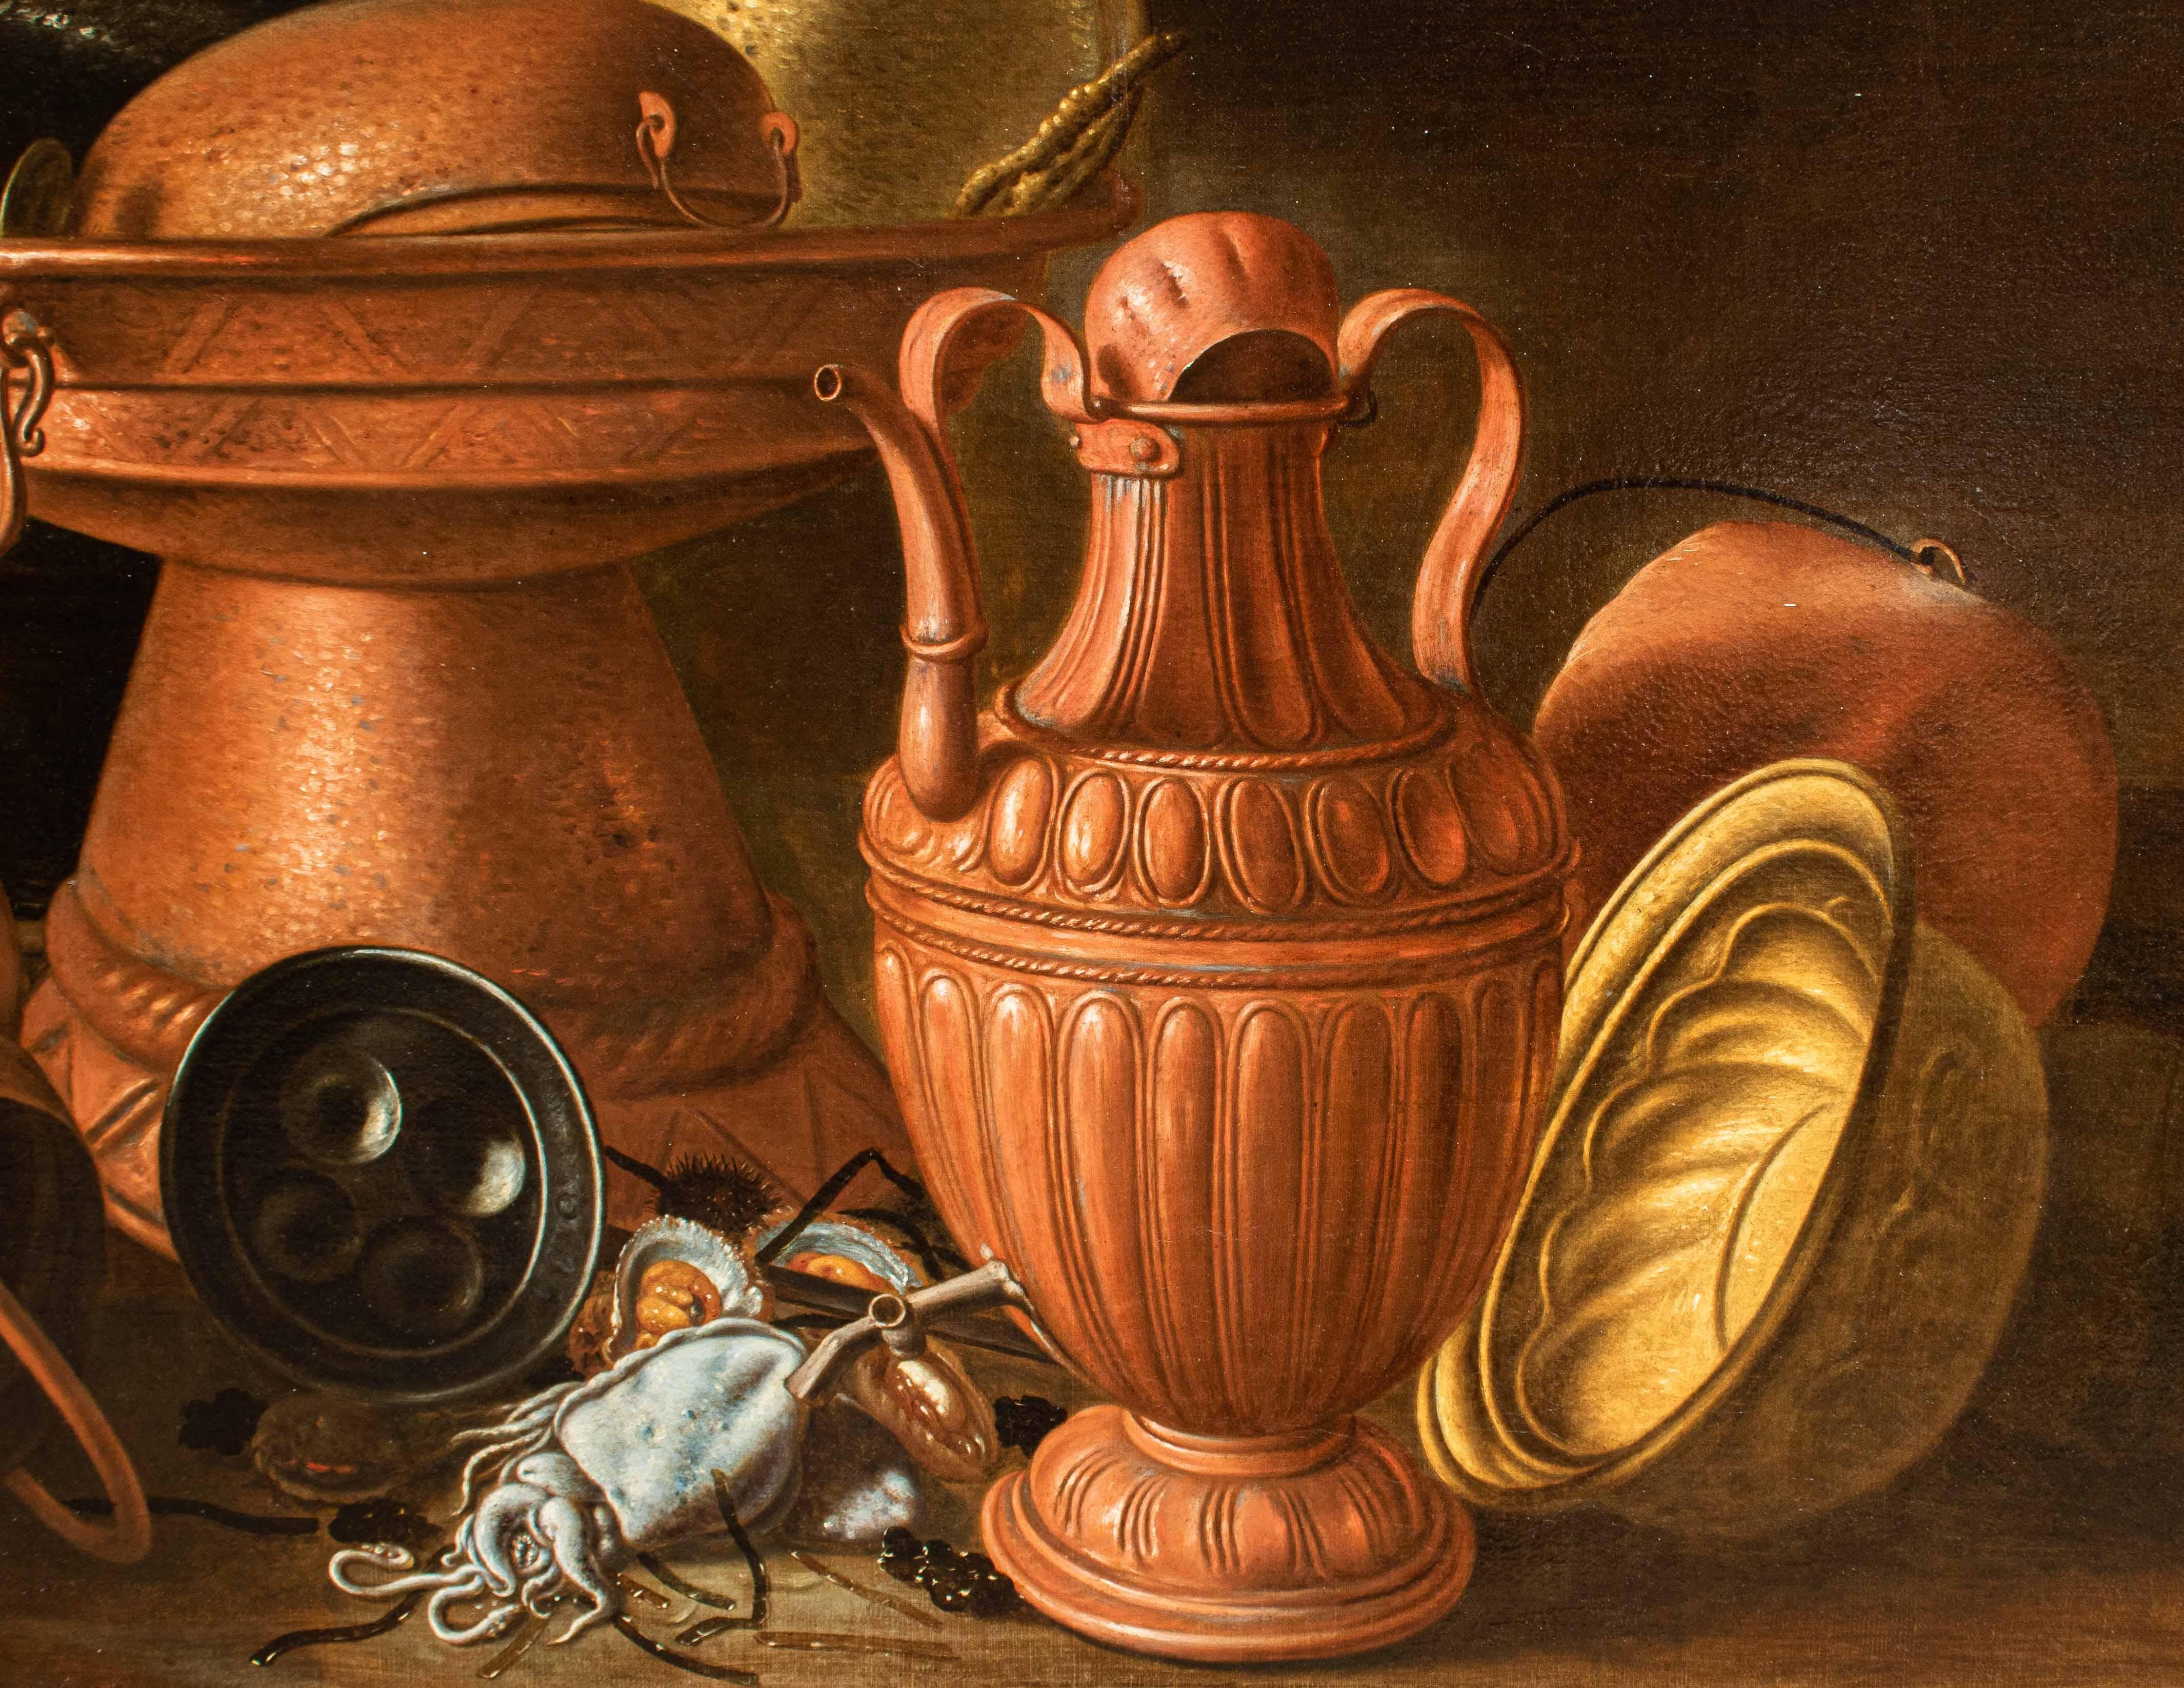 Still Life with Dishes Painting Oil on Canvas Giuseppe Ruoppolo For Sale 3